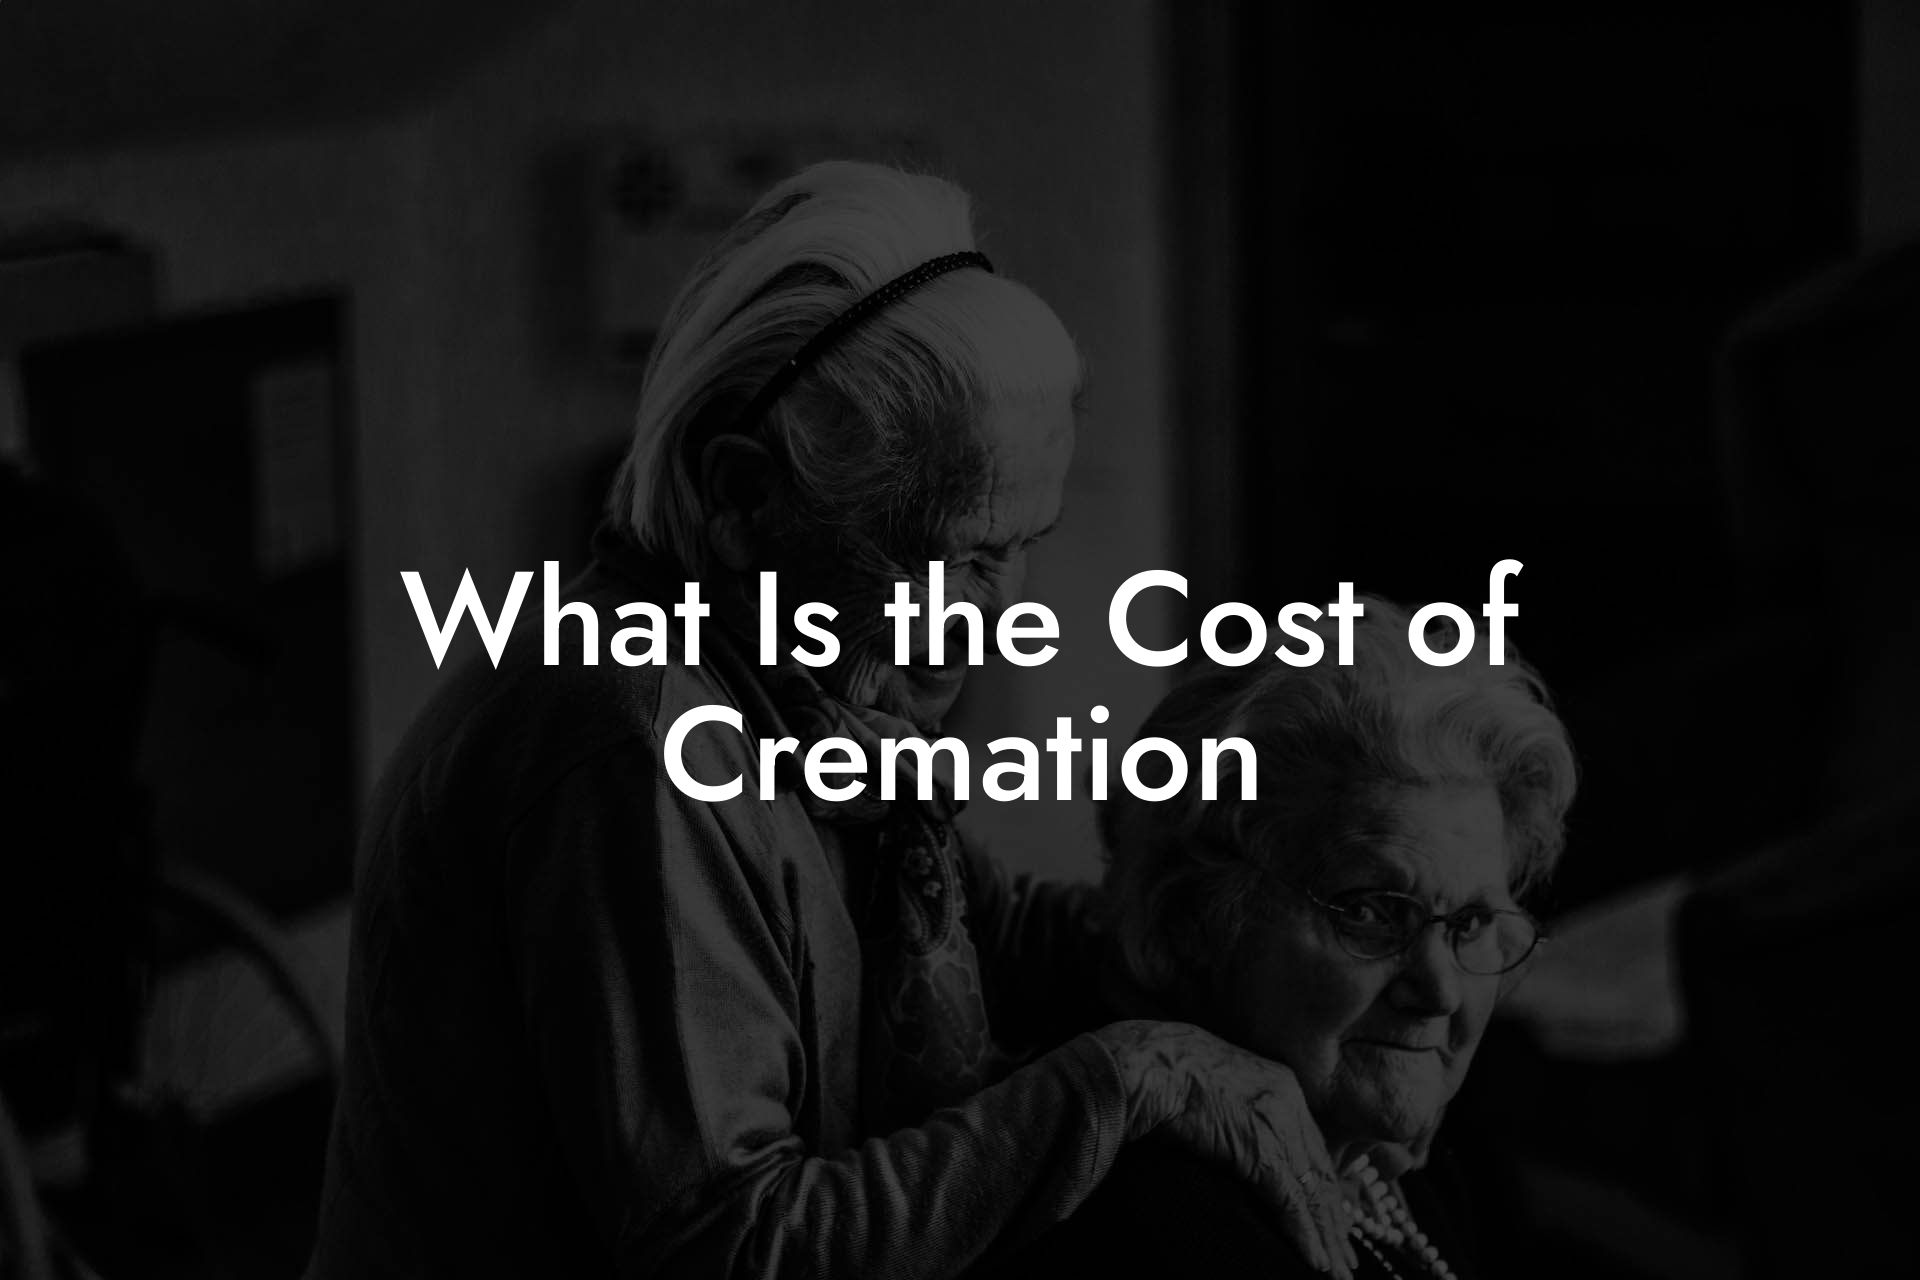 What Is the Cost of Cremation